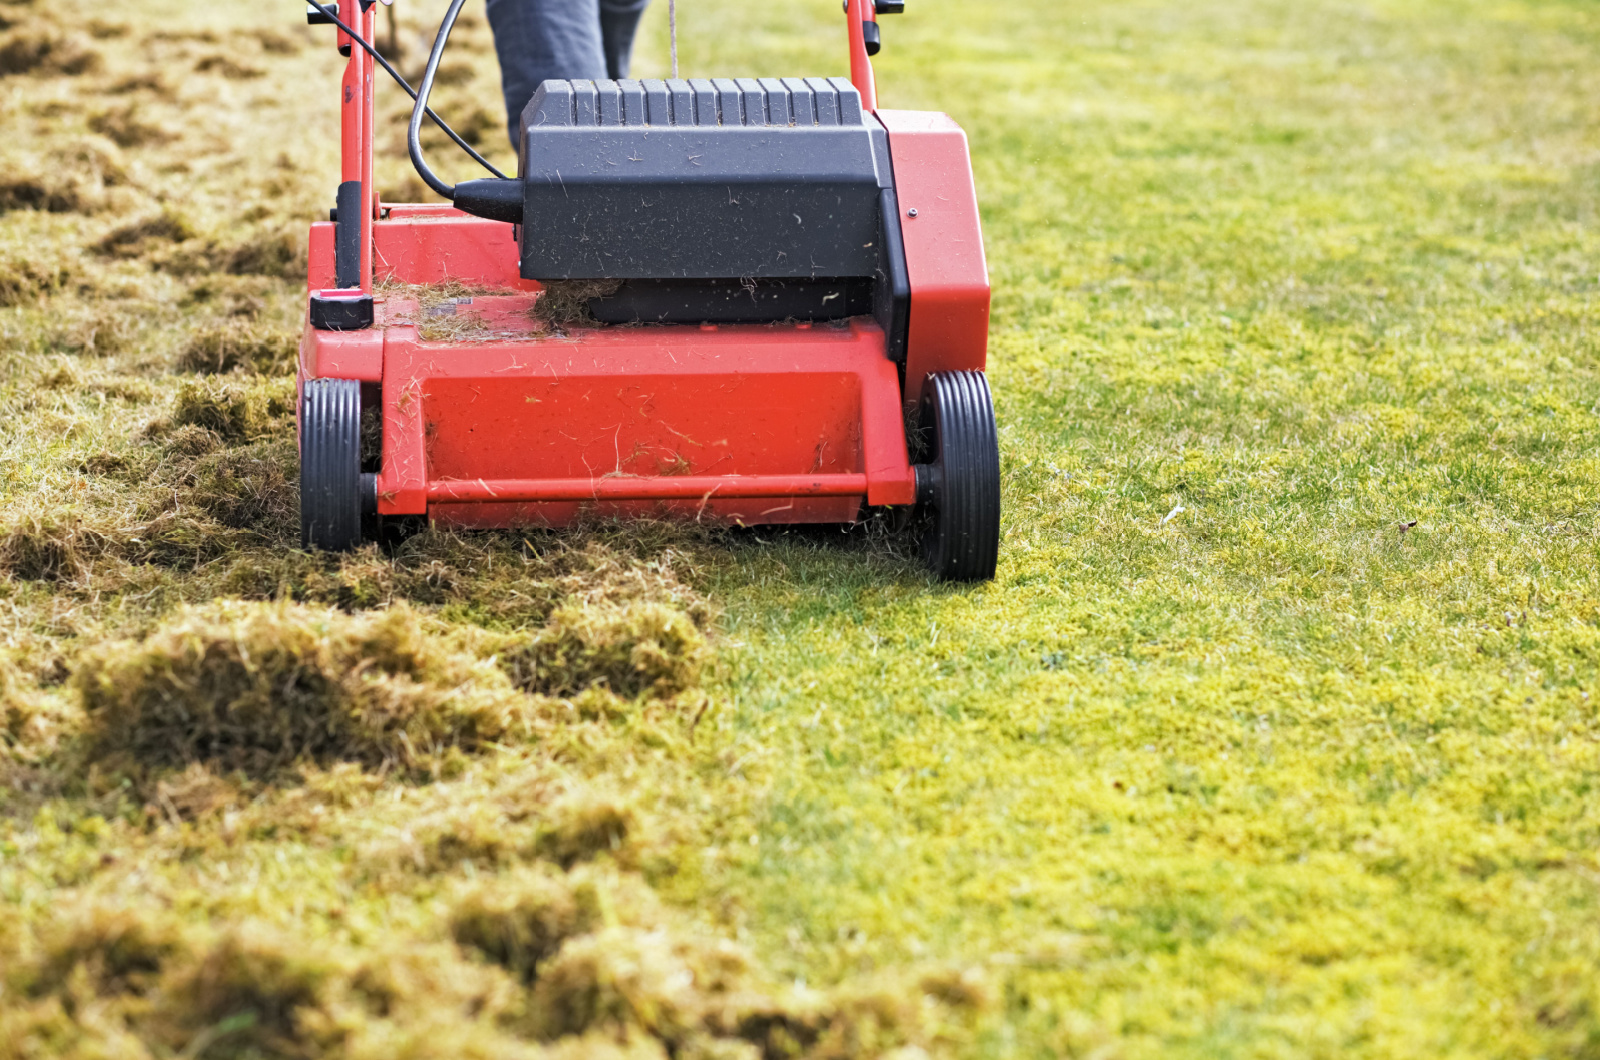 Dethatching the lawn